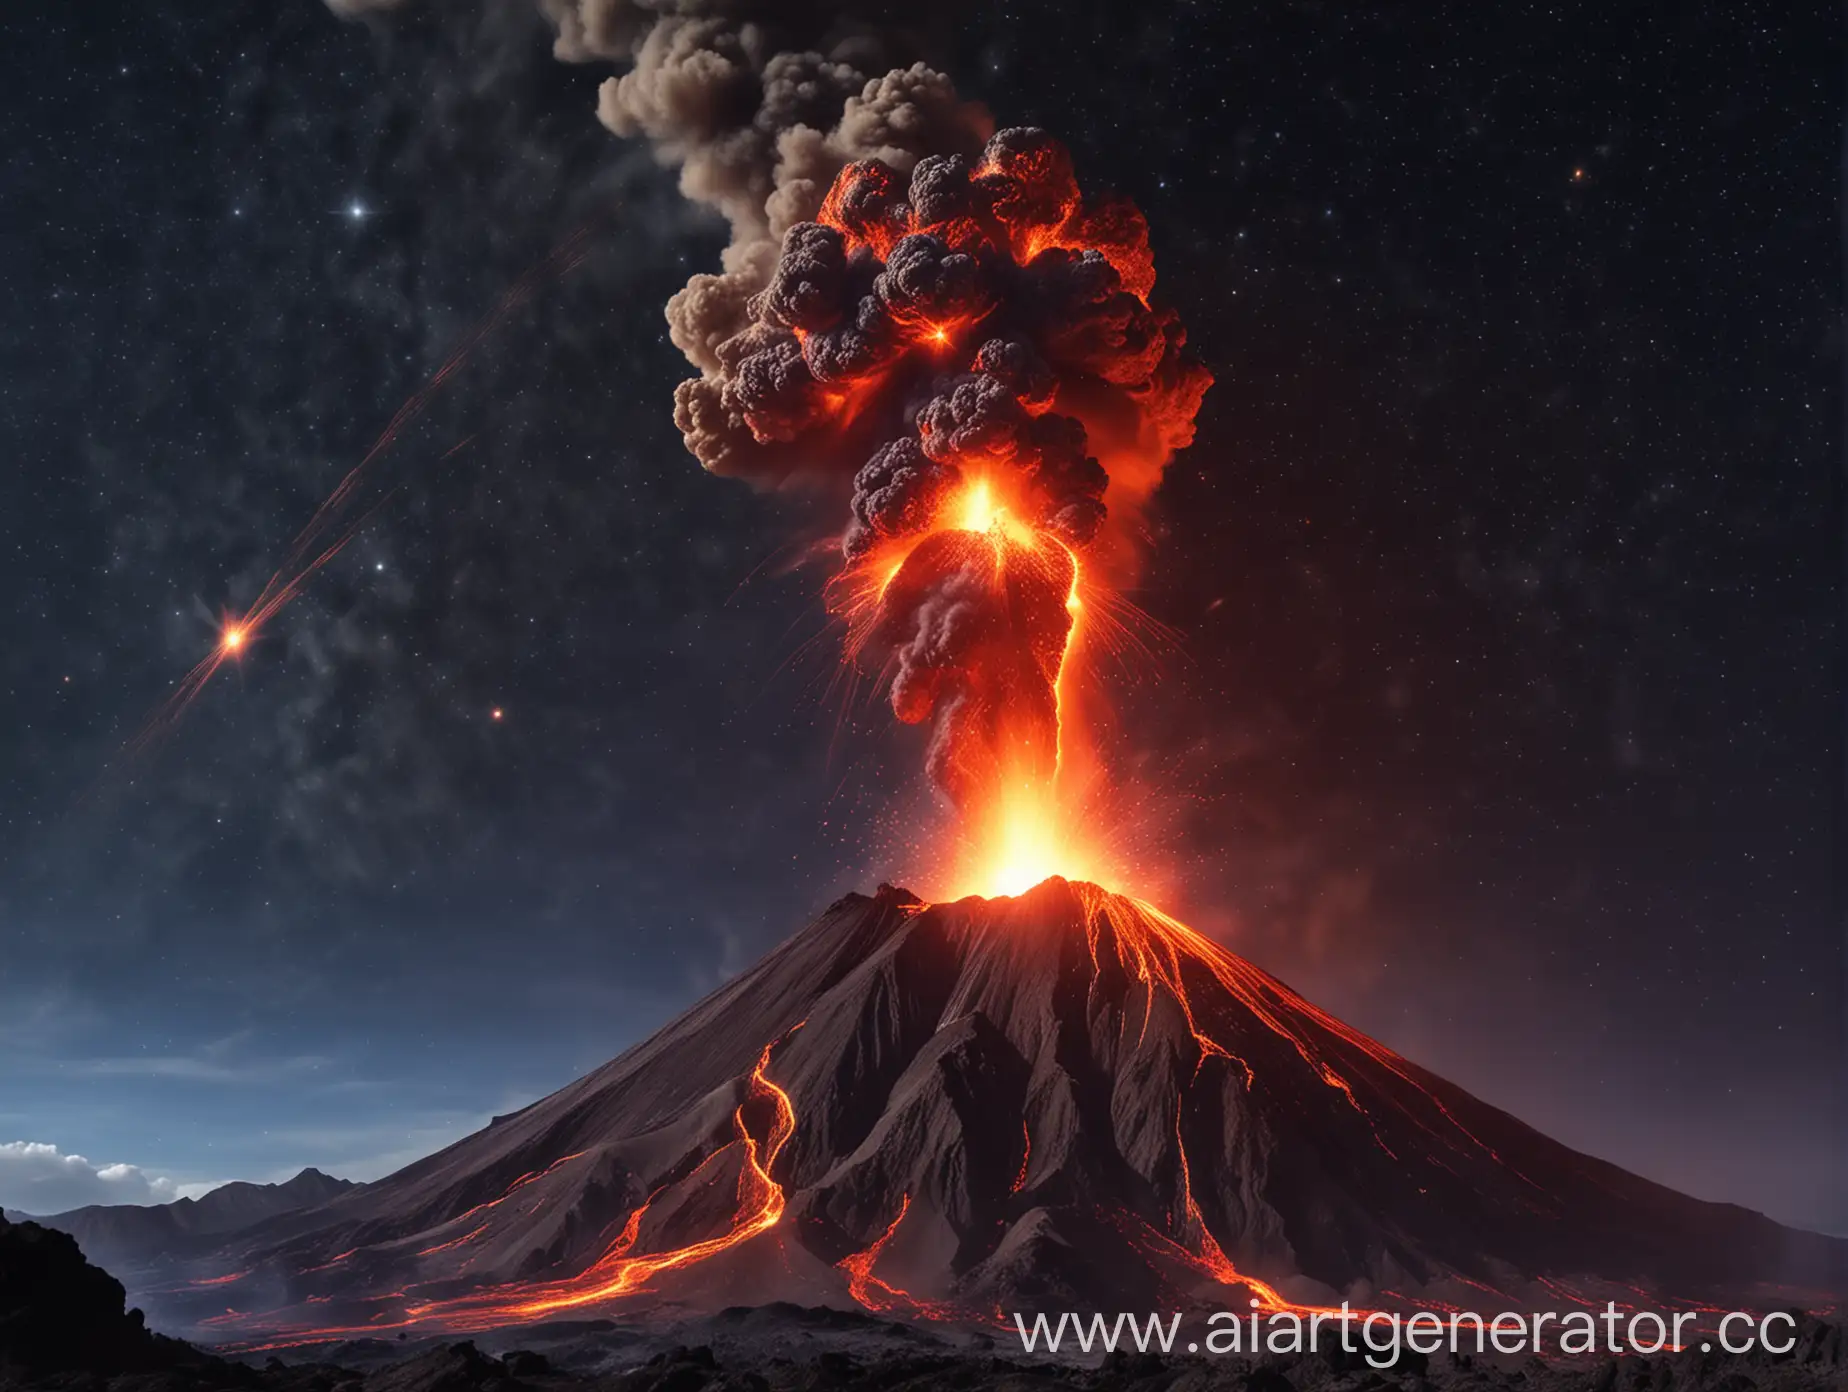 Erupting-Volcano-Silhouetted-Against-a-Starry-Night-Sky